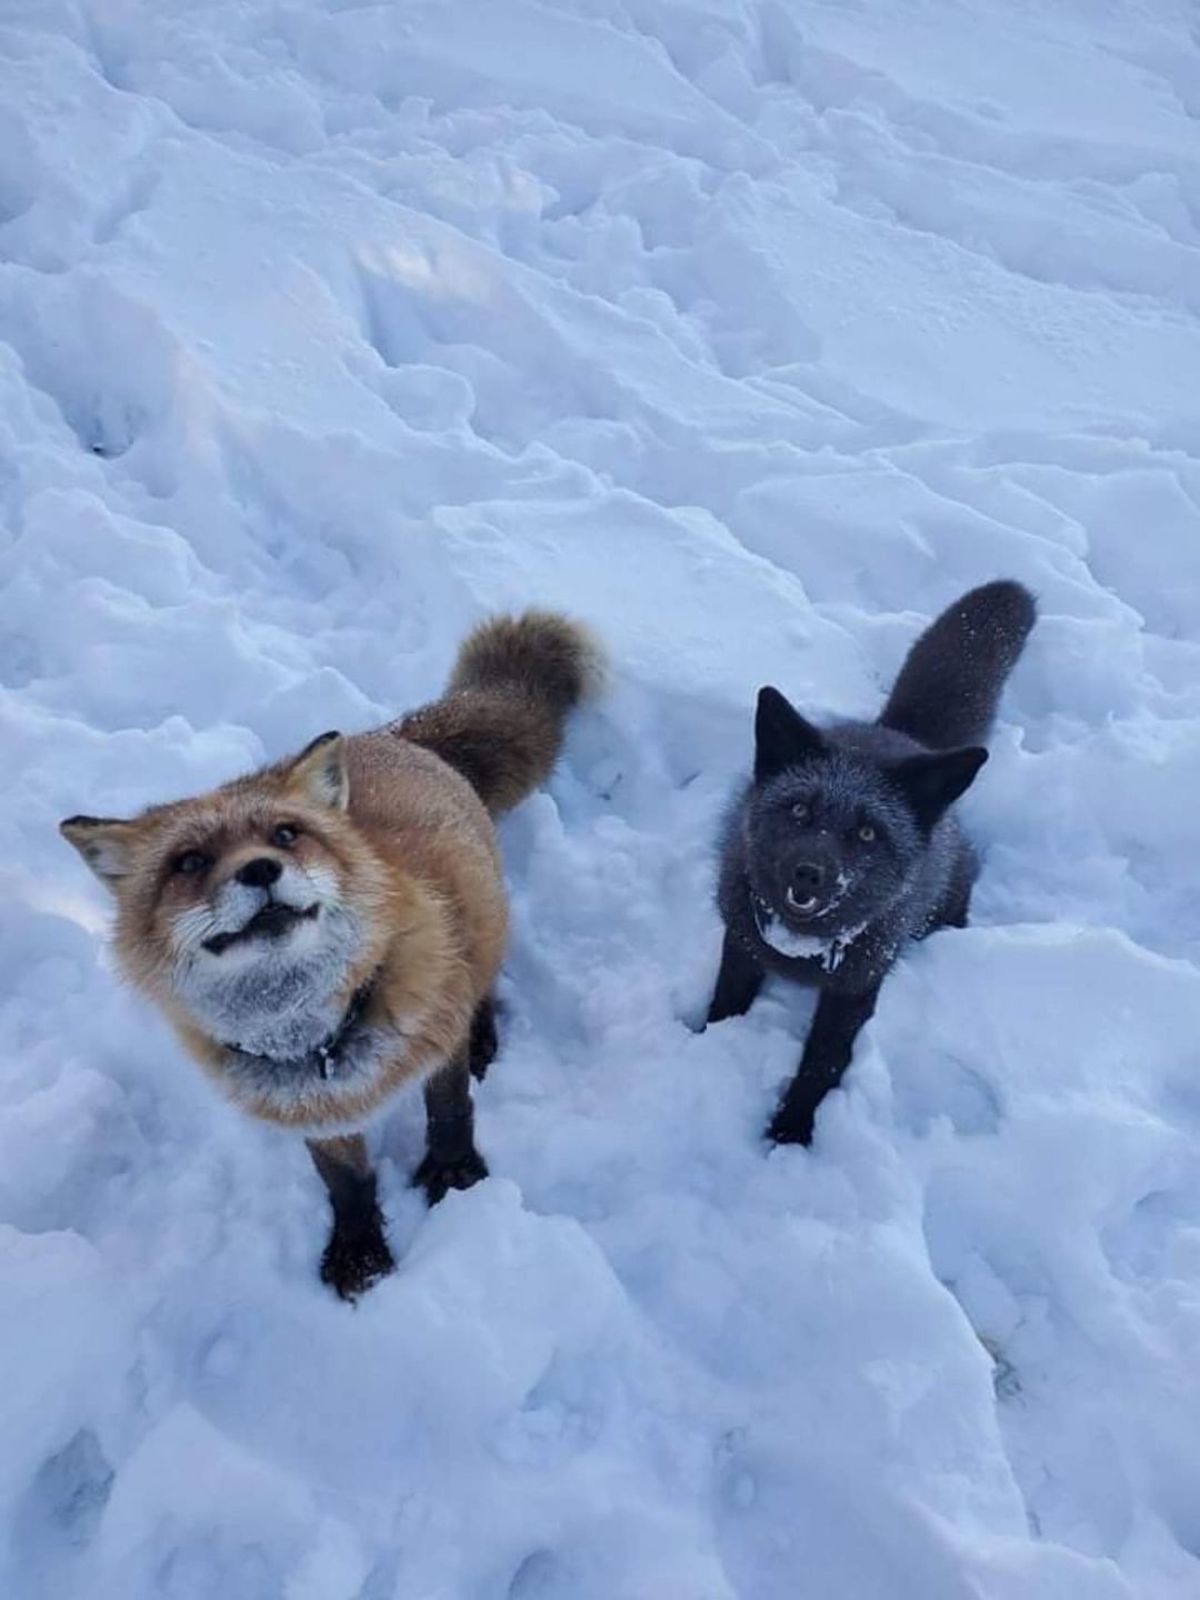 Shnow fockses. join list: RescueCritters (53 subs)Mention History Finnegan (left) and Serafina at SaveAFox Rescue.. Finn has such a unique face you can always tell him apart from a crowd of red foxes.